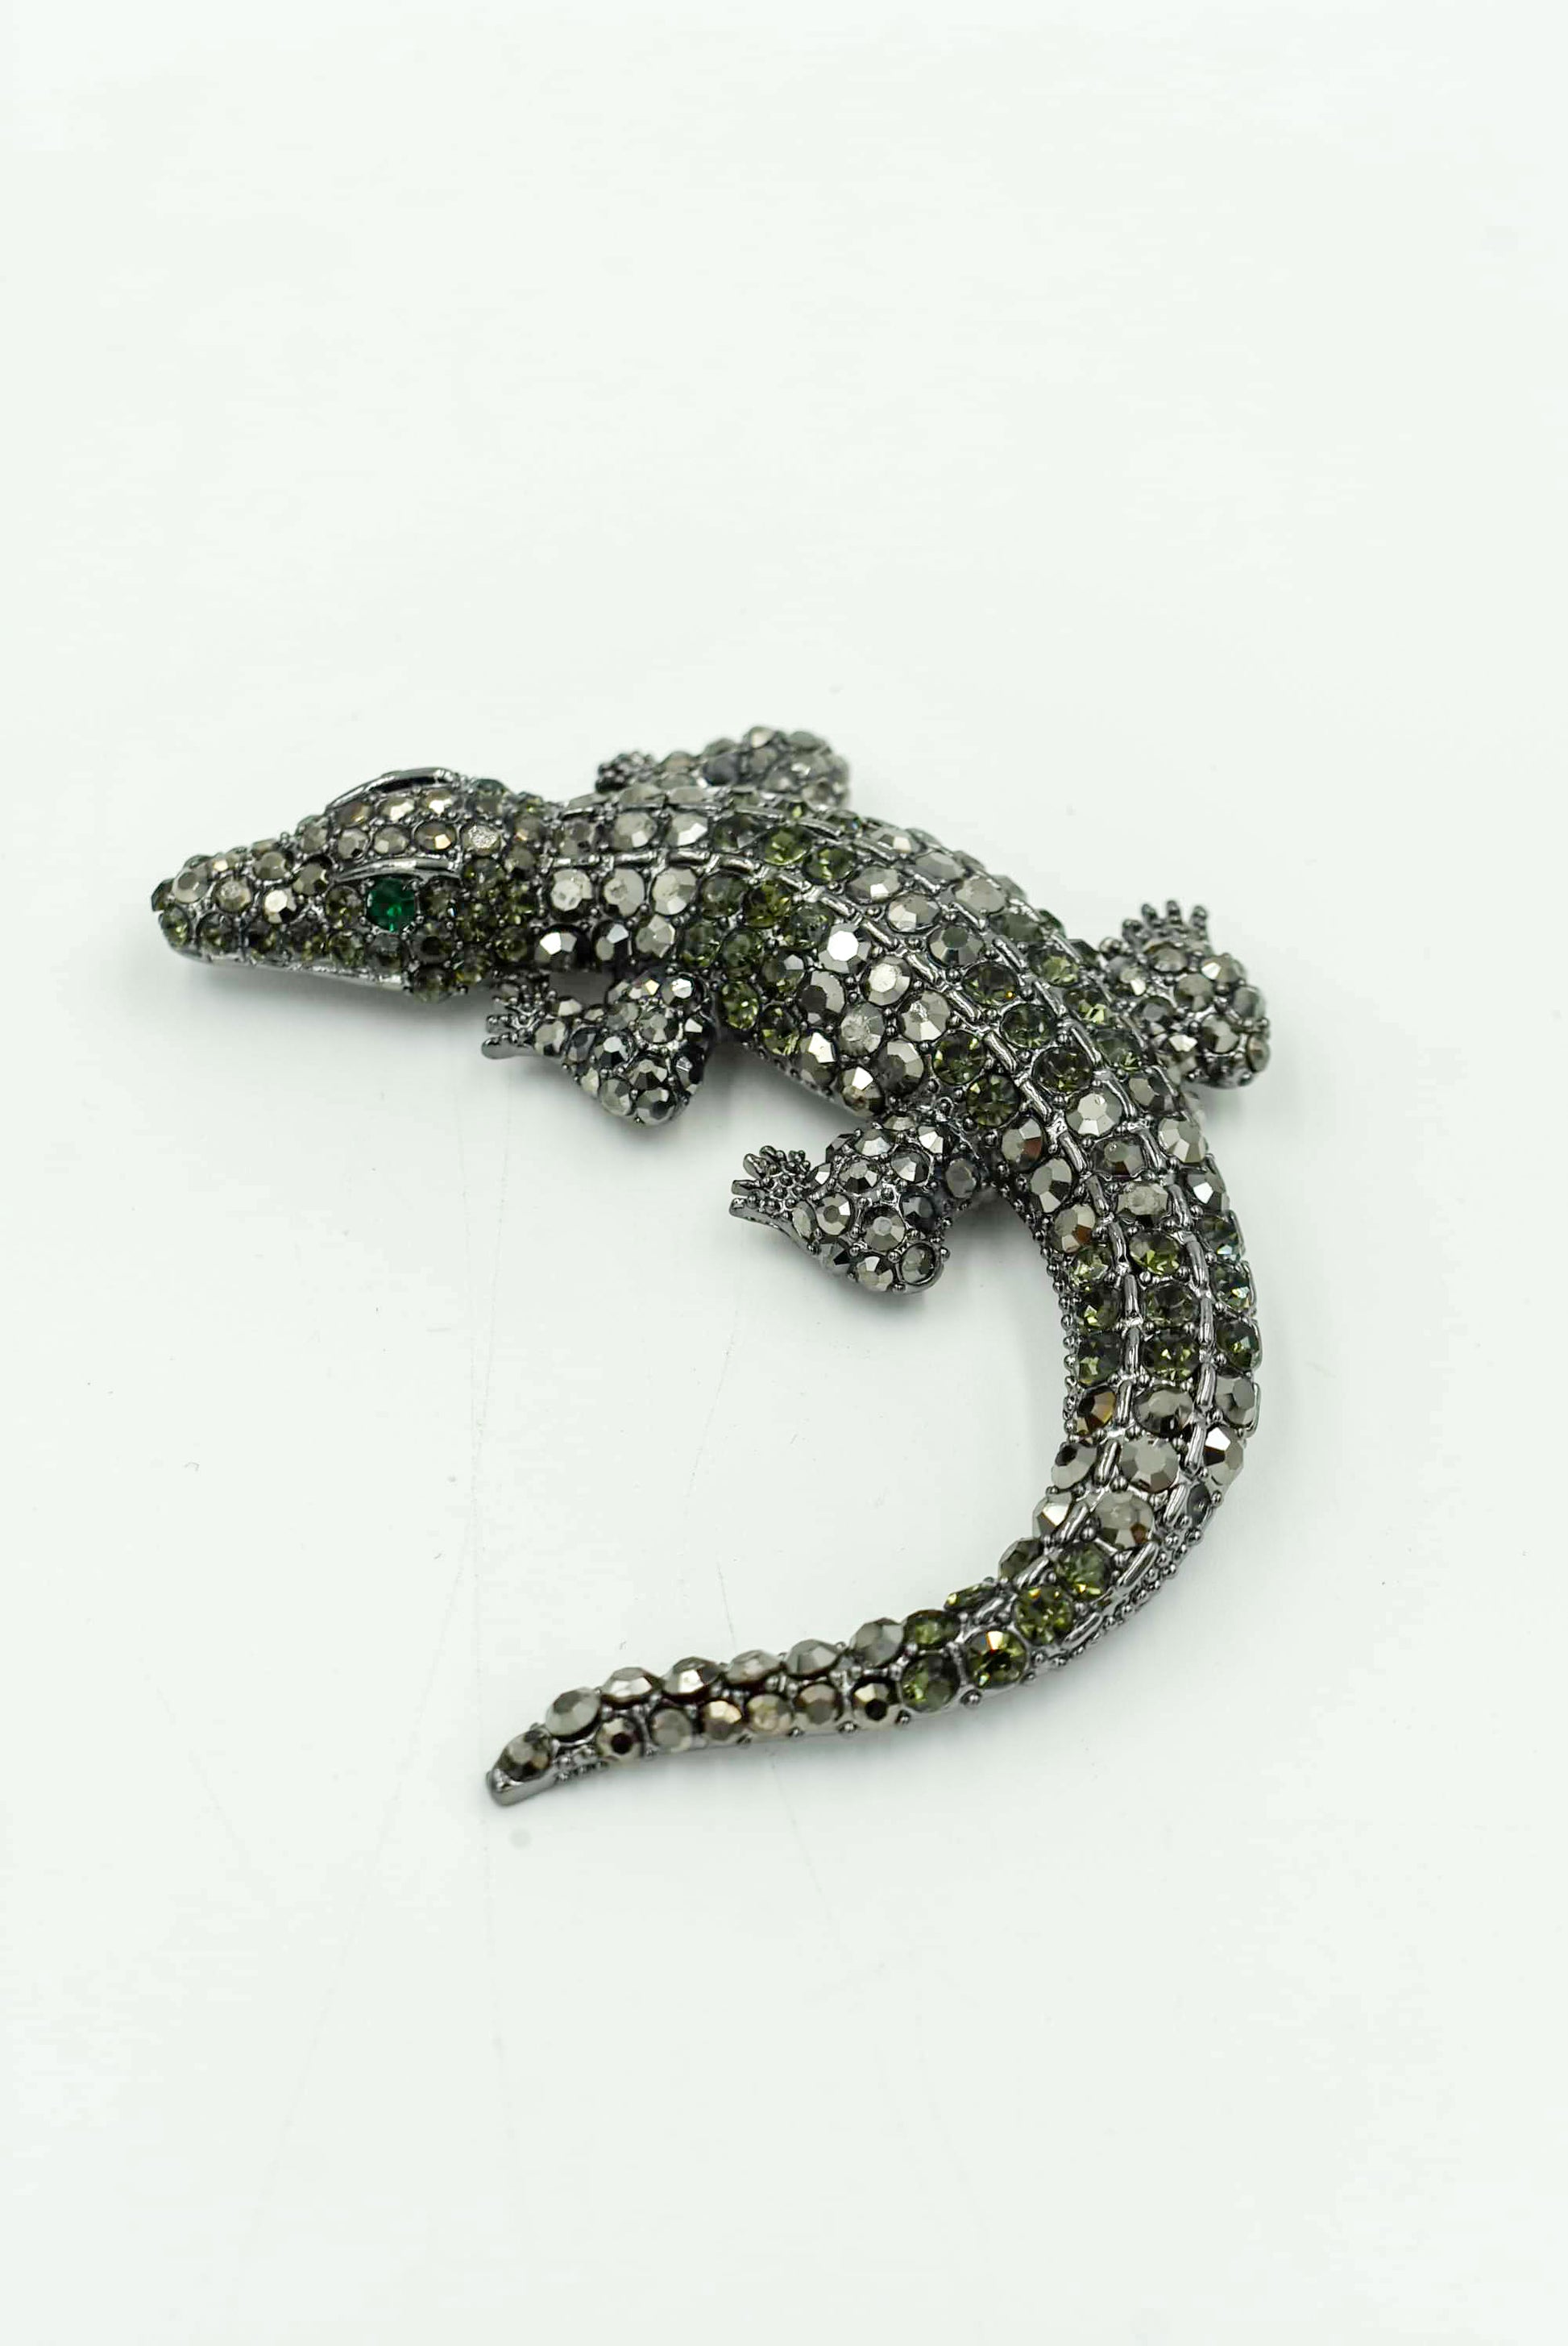 Large Alligator Pins in Different Colors Black, Clear, Amber, Green, and Pink/Green